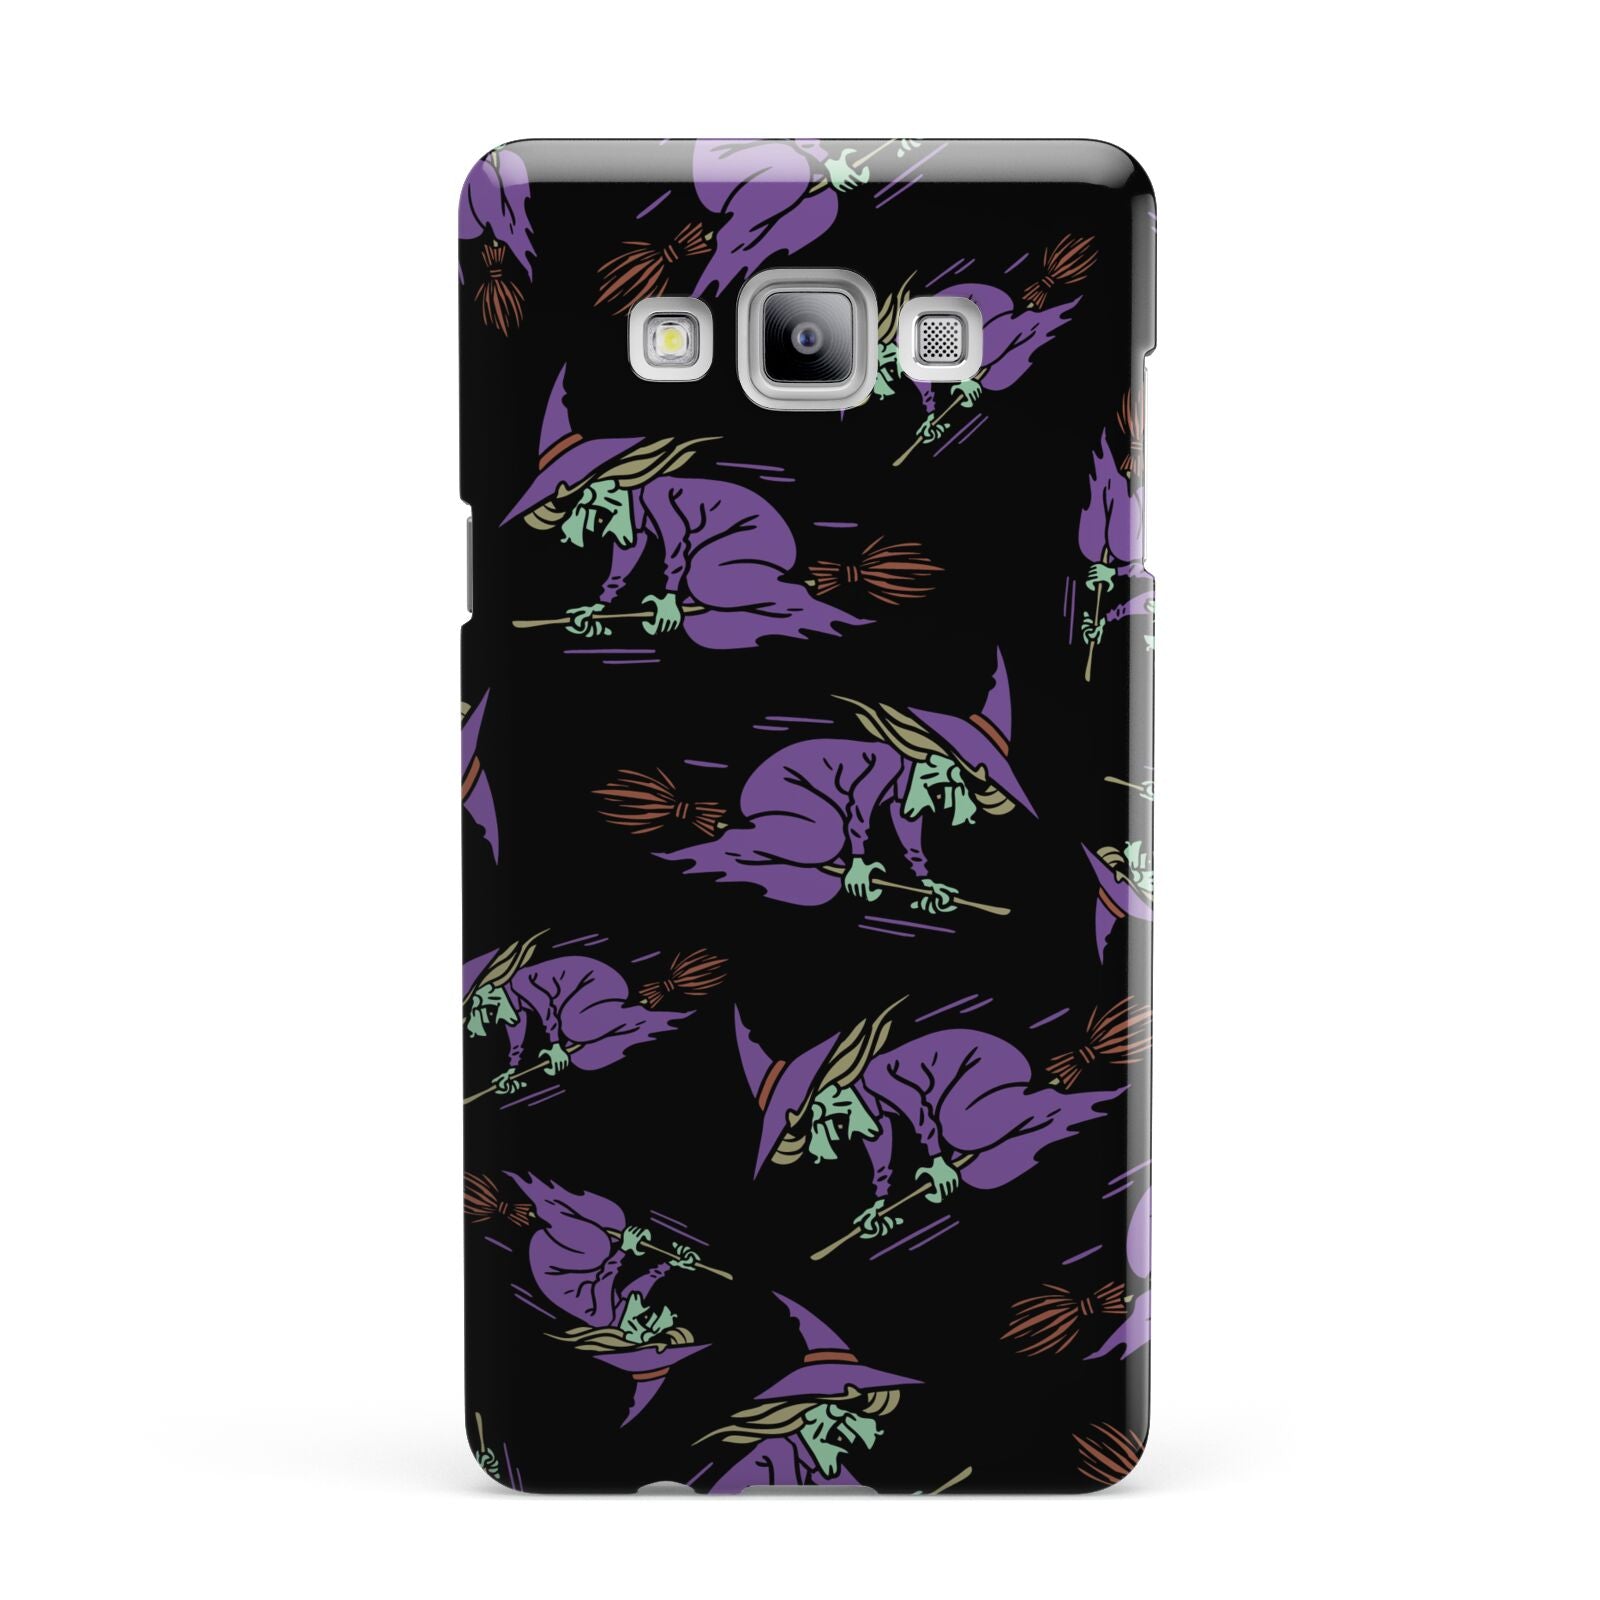 Flying Witches Samsung Galaxy A7 2015 Case